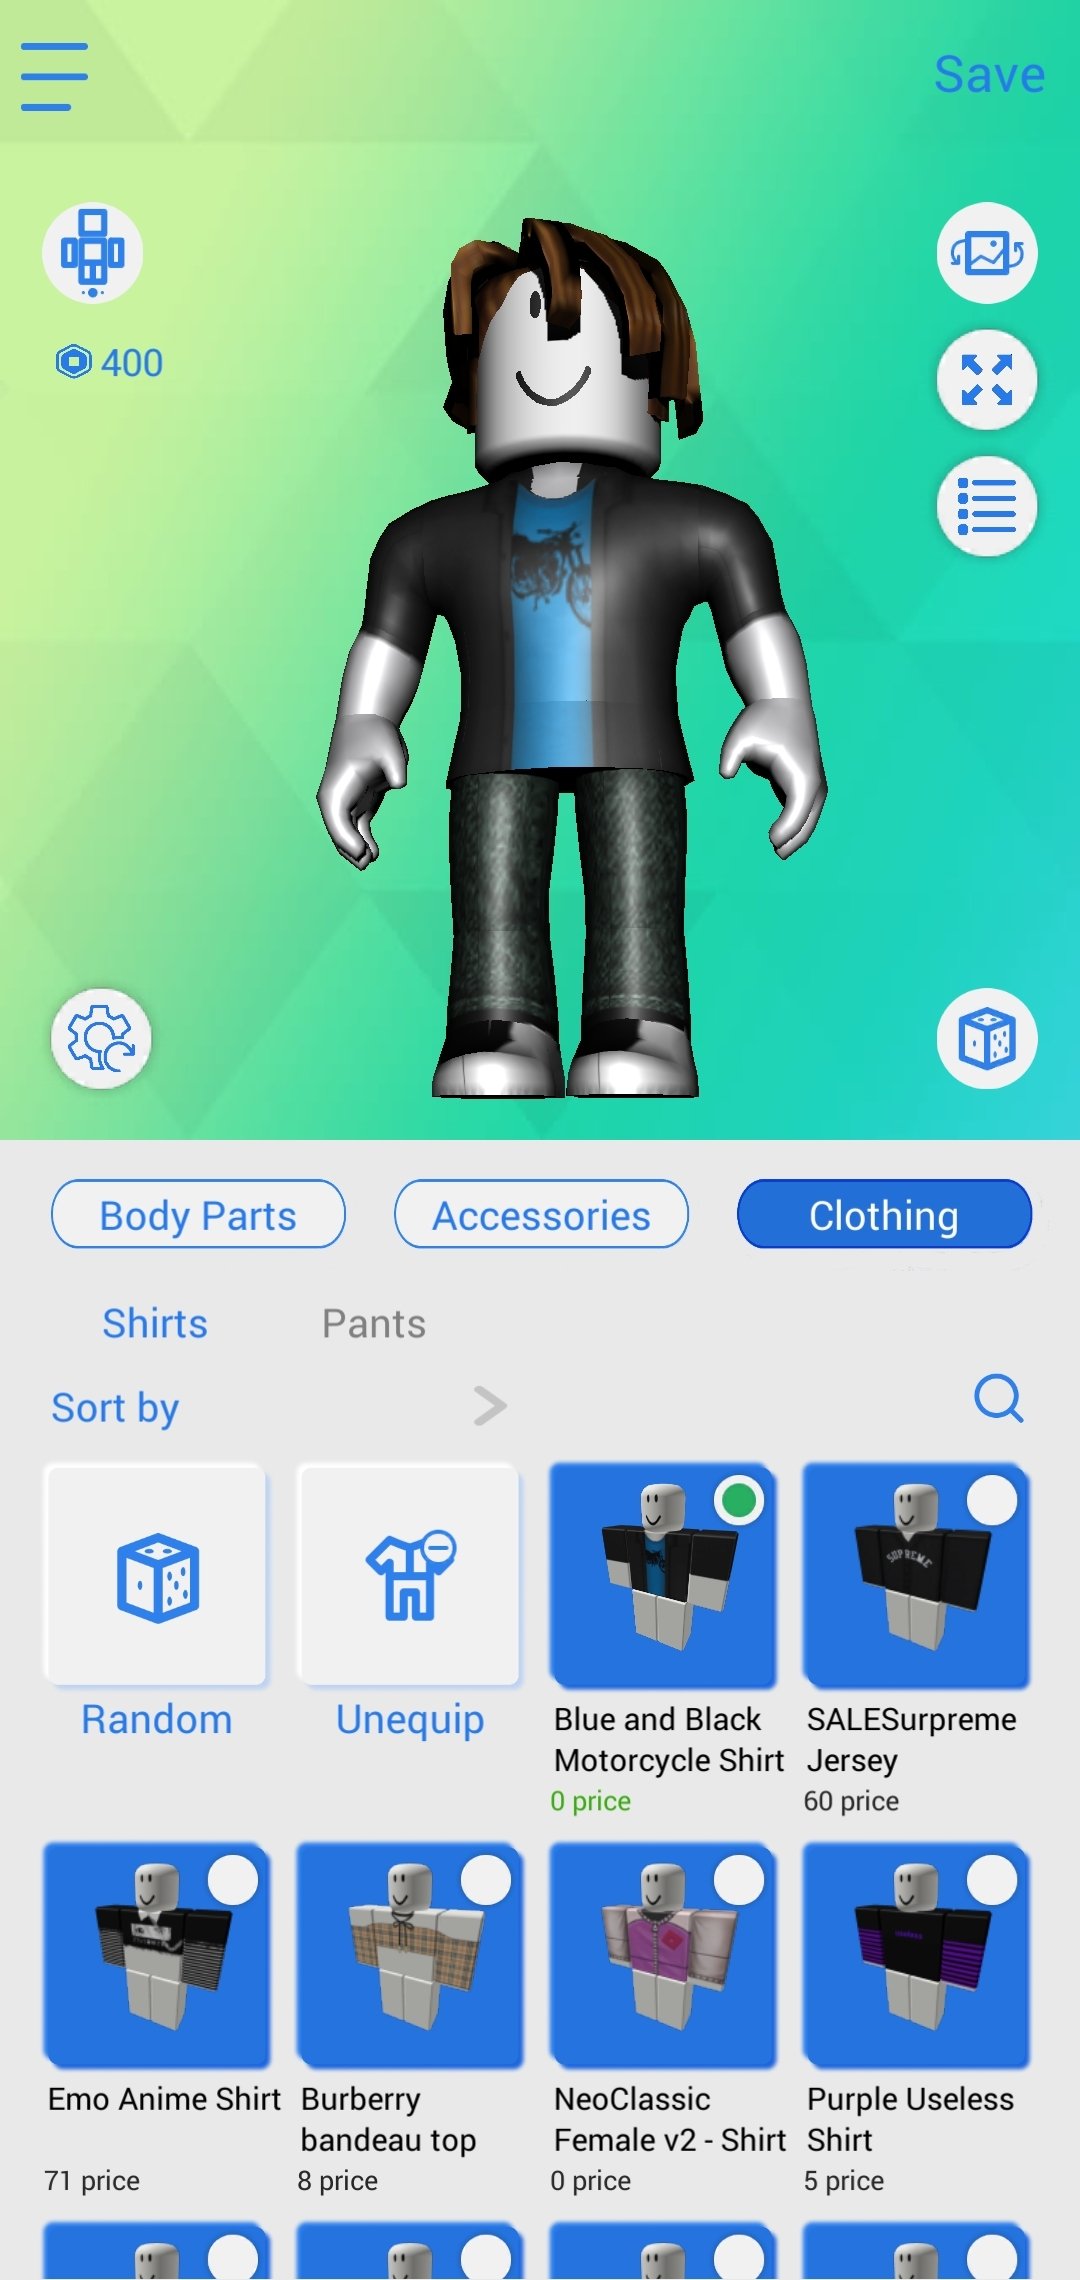 Softie Boy Outfits Roblox Under 400, Roblox Softie Boy Outfits Under 400  Robux